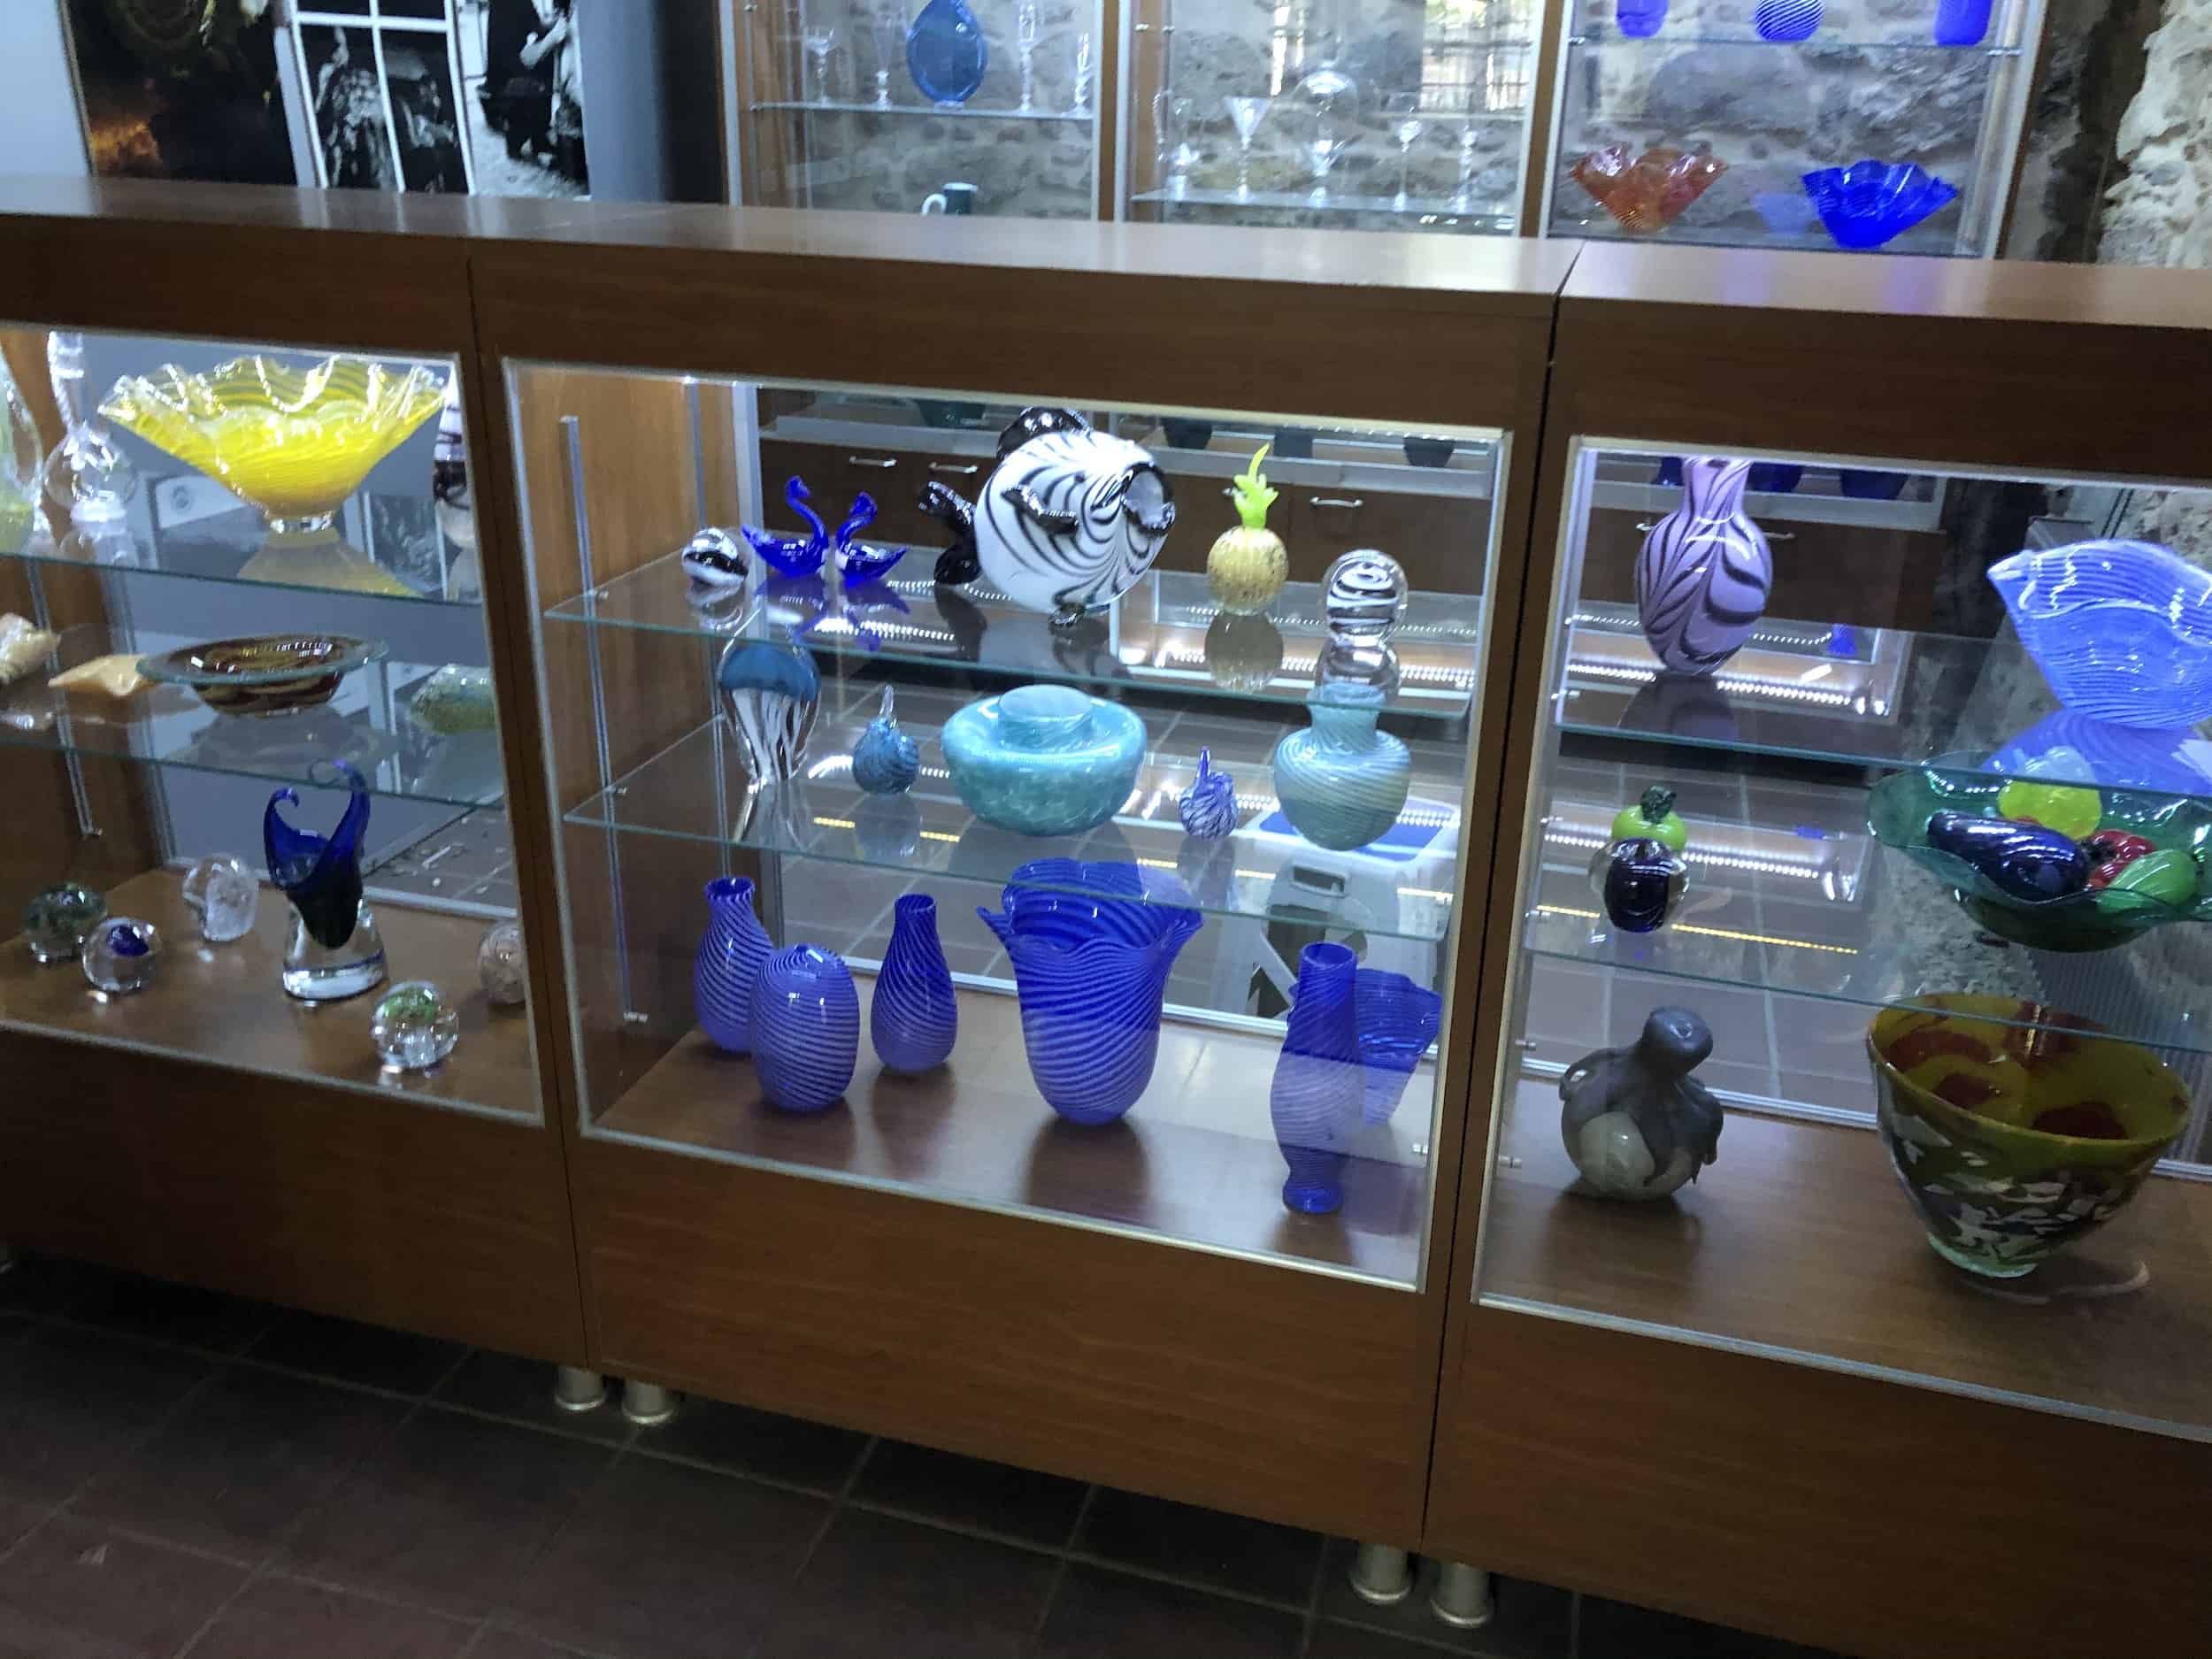 Display featuring glass works